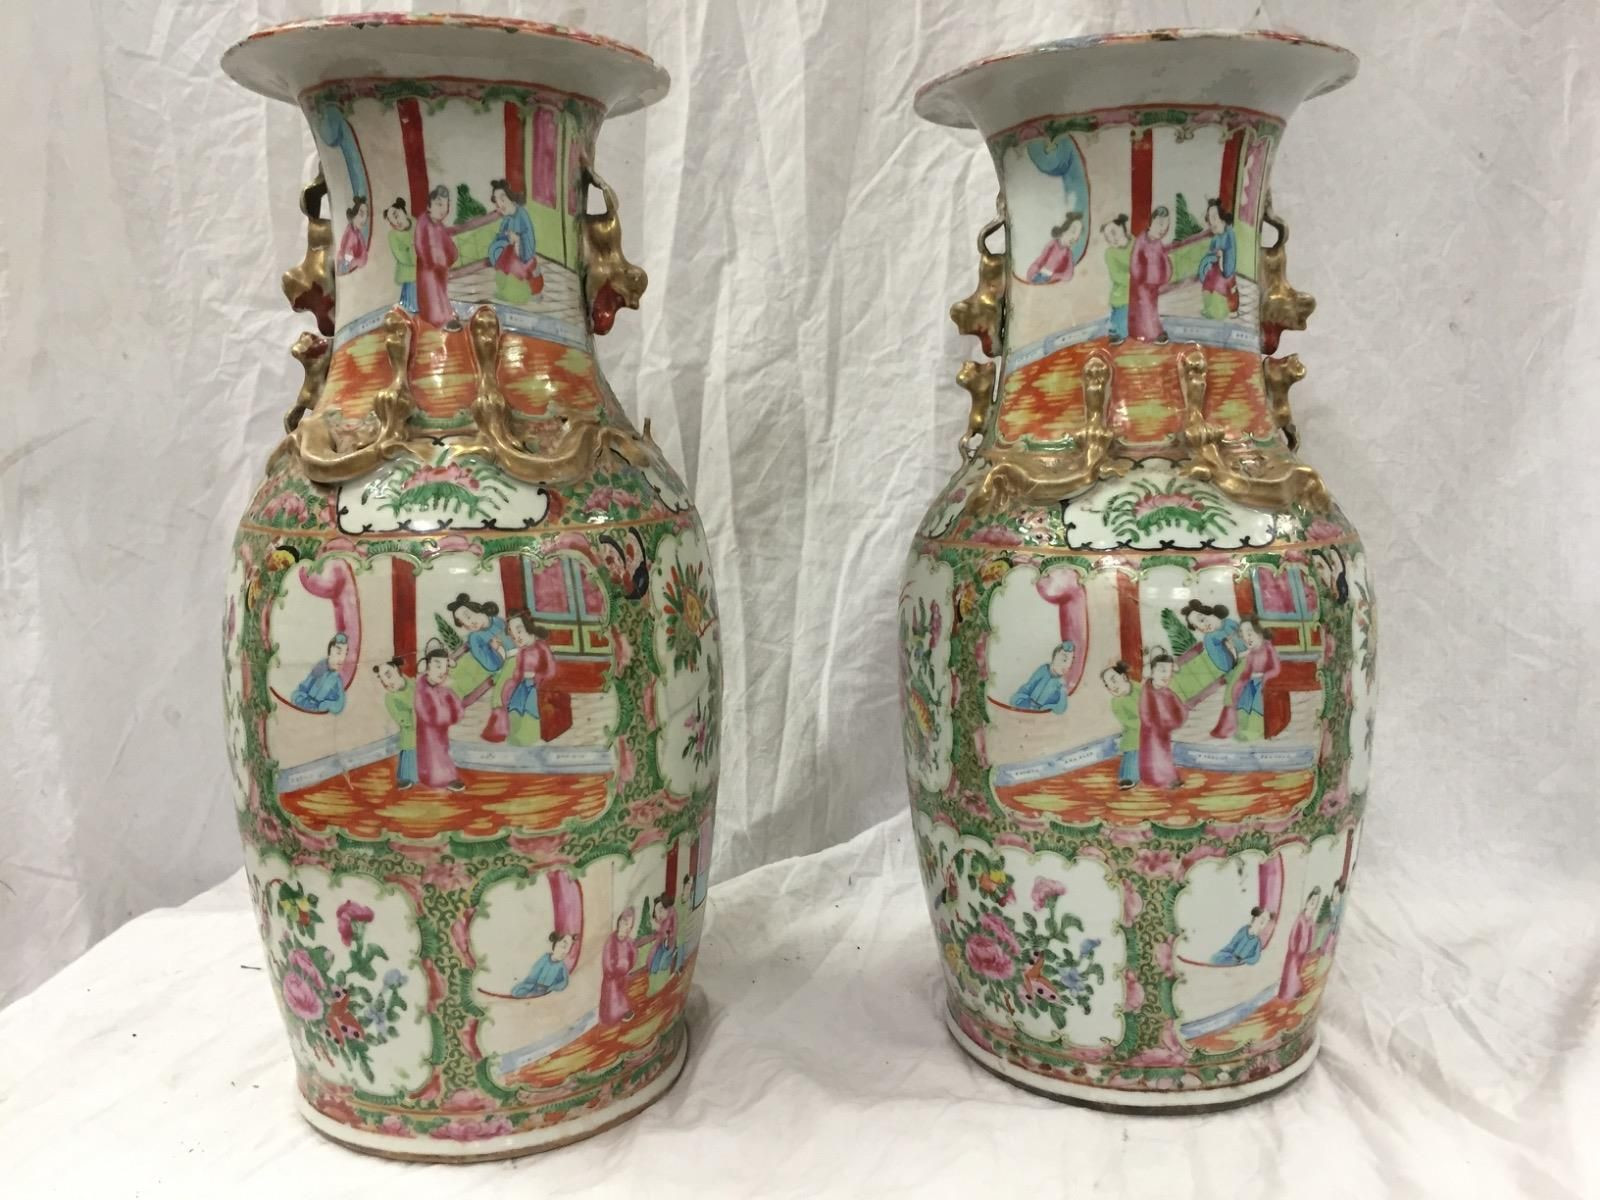 19 Stylish Tall Chinese Vases for Sale 2024 free download tall chinese vases for sale of 22 large chinese vases for the floor the weekly world inside 22 large chinese vases for the floor